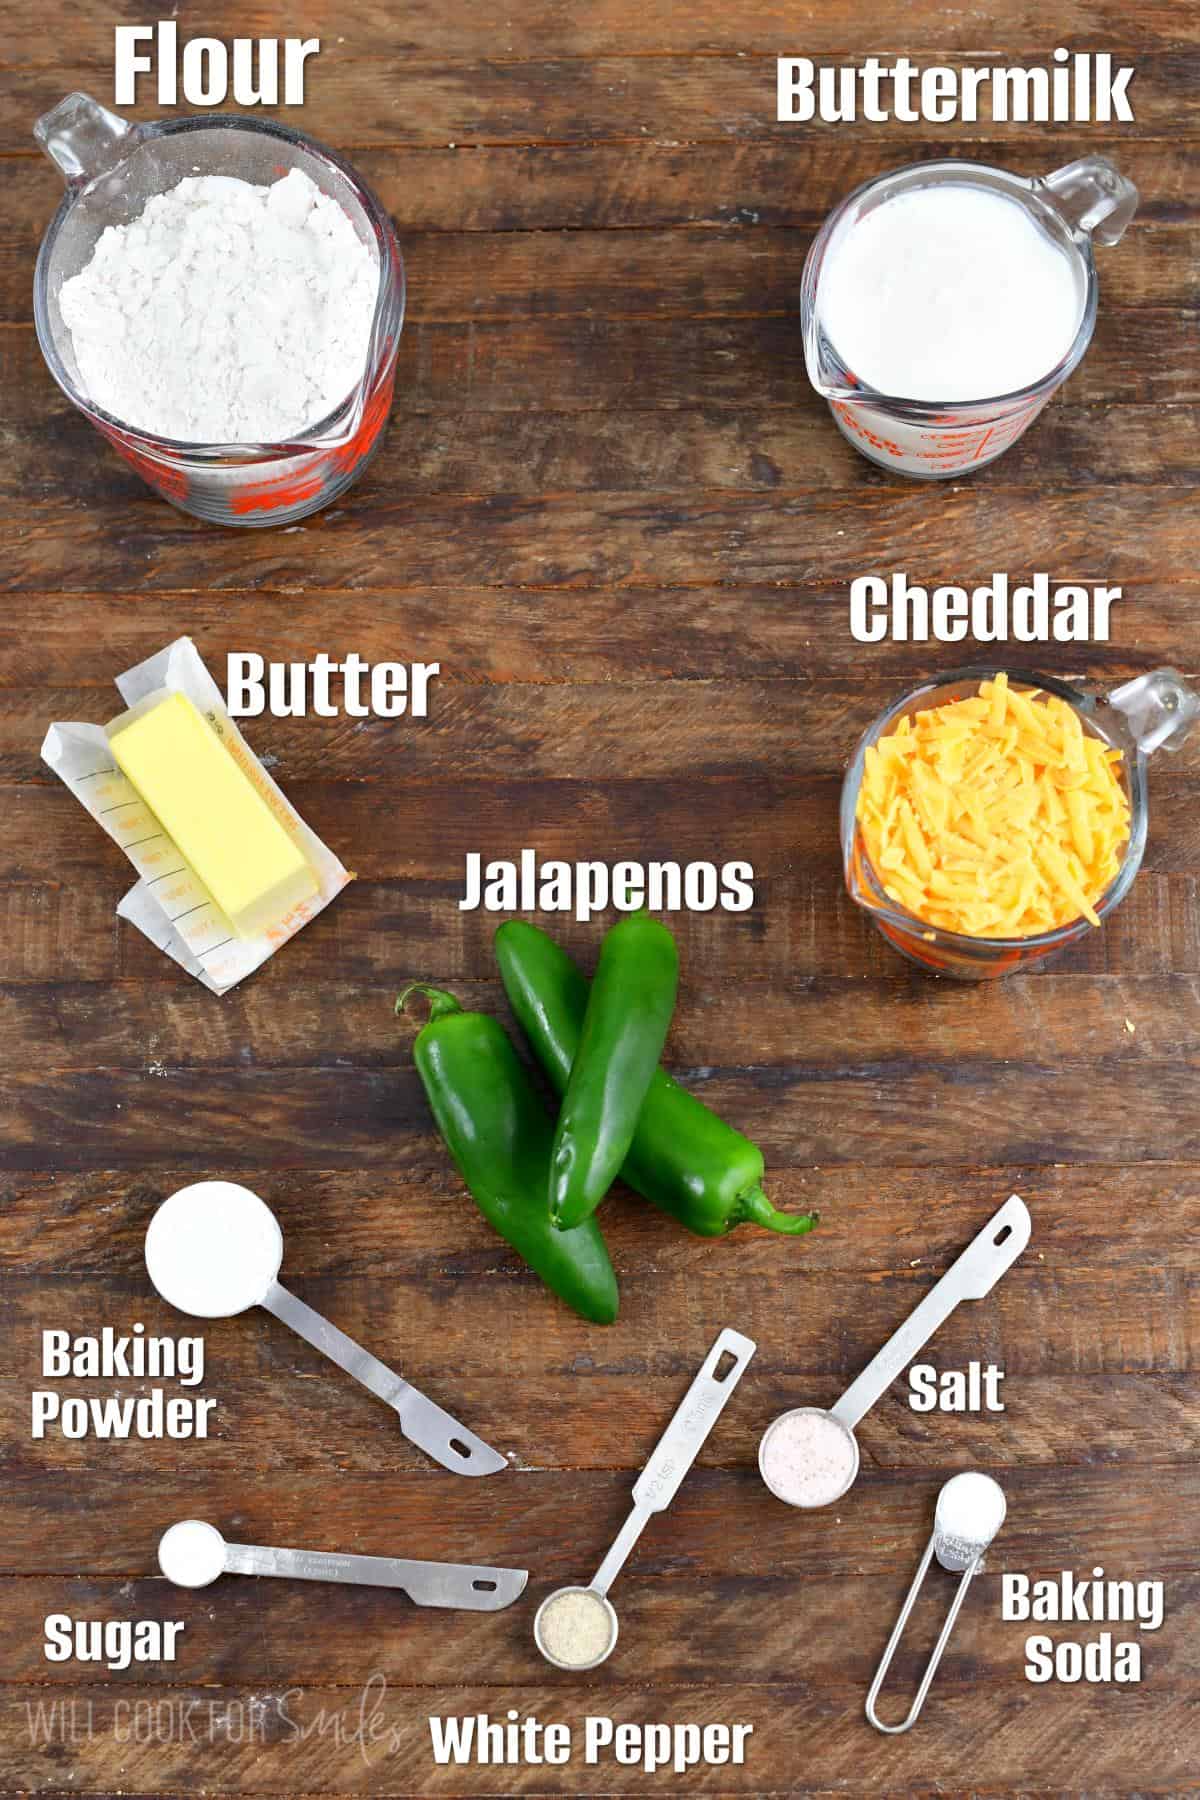 Labeled ingredients for Jalapeno Cheddar Buttermilk biscuits on a wood surface.